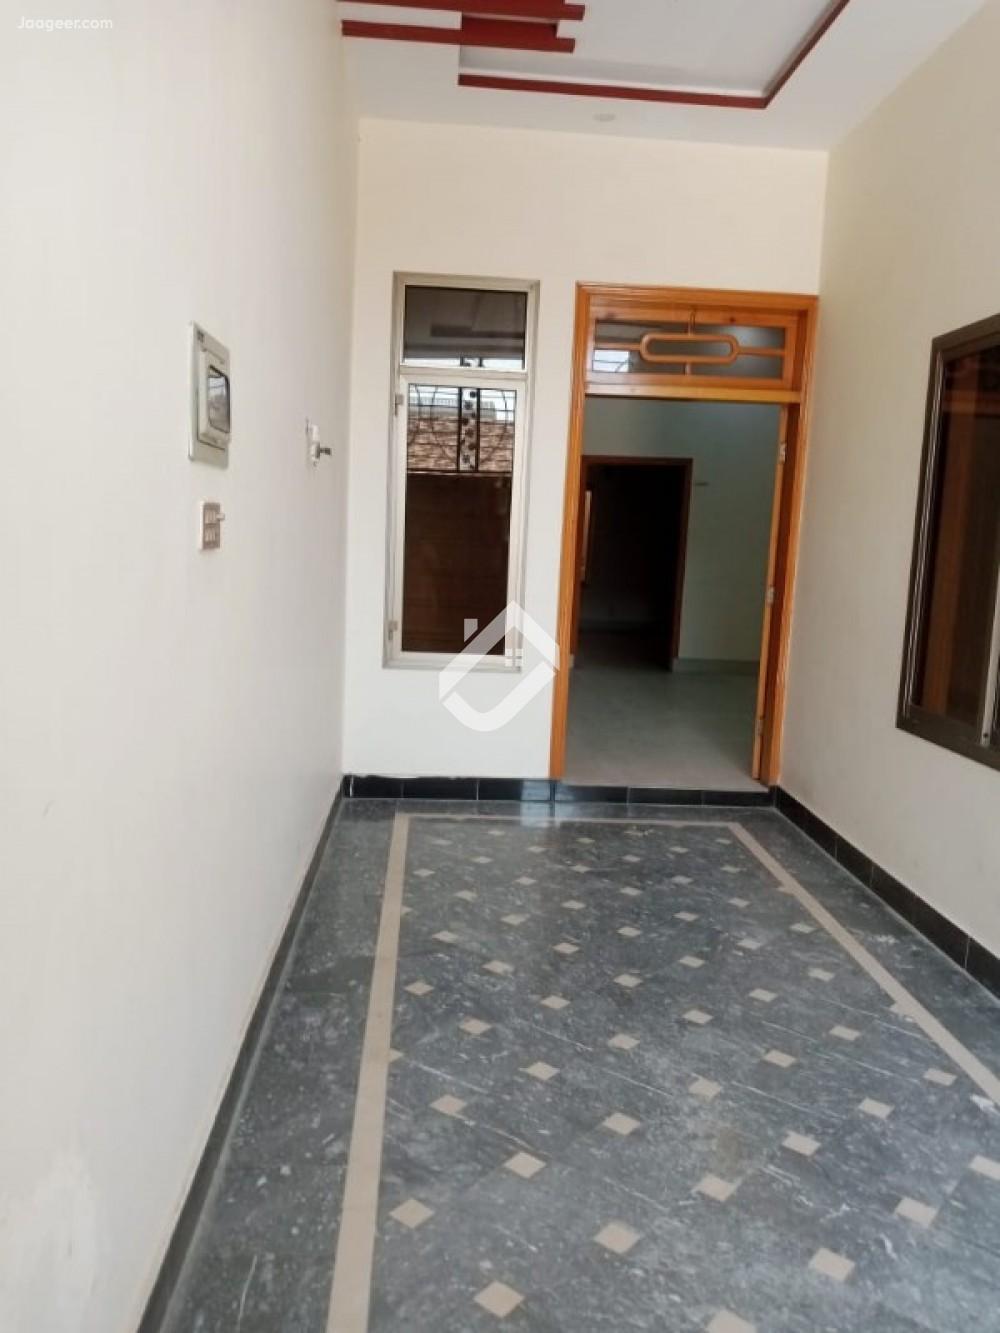 View  3.5 Marla Double Storey House For Rent In Old Satellite Town  in Old Satellite Town, Sargodha